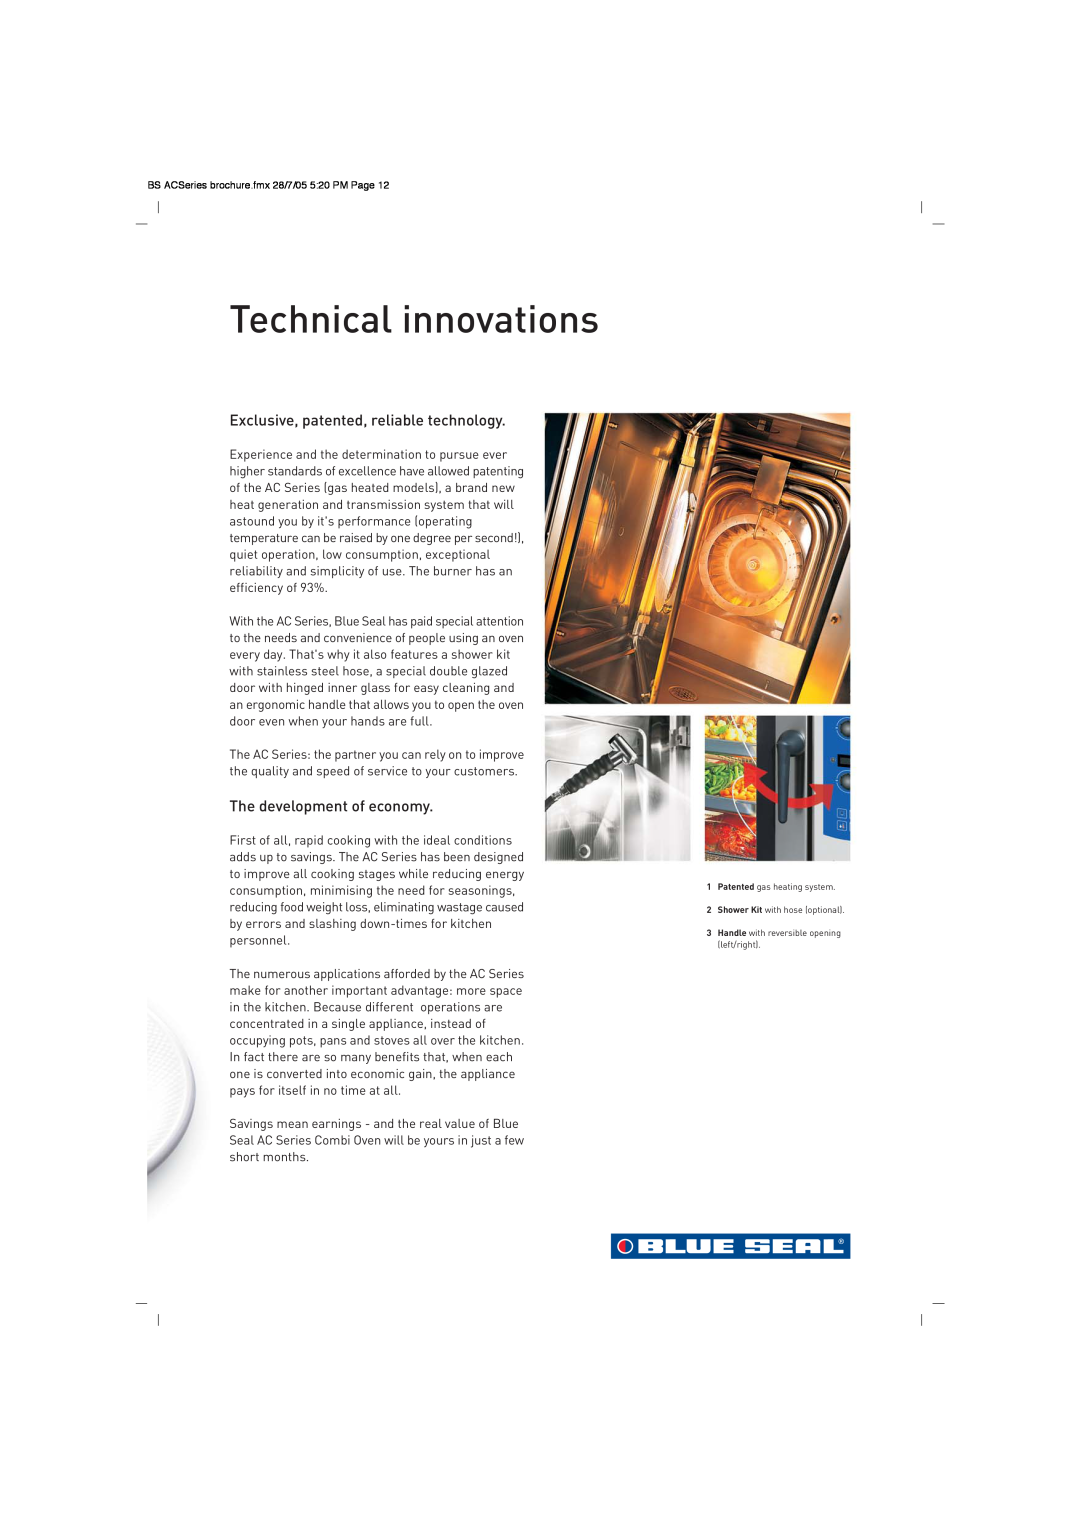 Moffat AC Series brochure Technical innovations, Exclusive, patented, reliable technology, The development of economy 